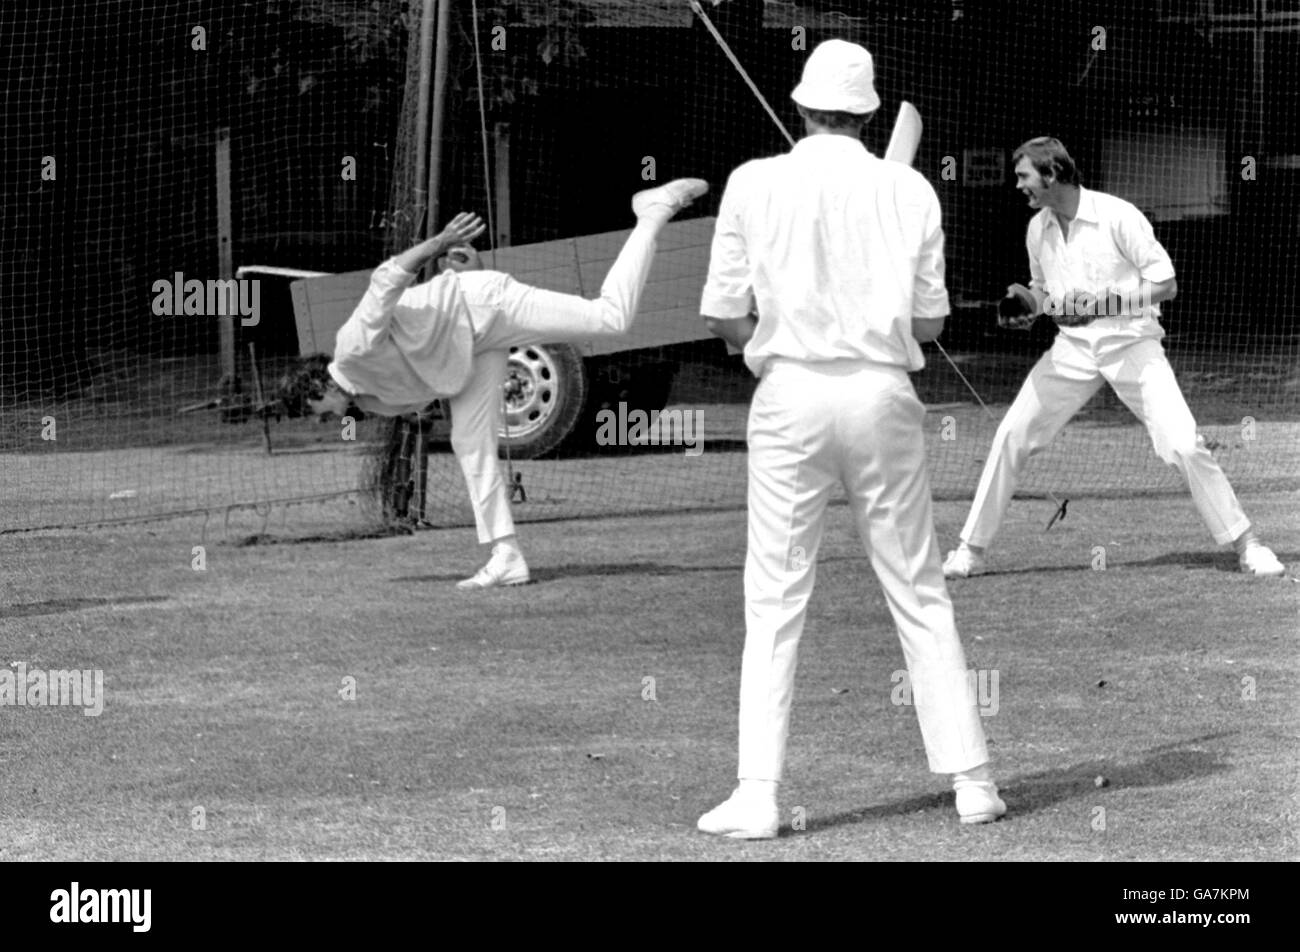 Australia's Dennis Lillee (l) stretches to take a catch during fielding practice as teammates Greg Chappell (c) and Ashley Mallett (r) look on Stock Photo